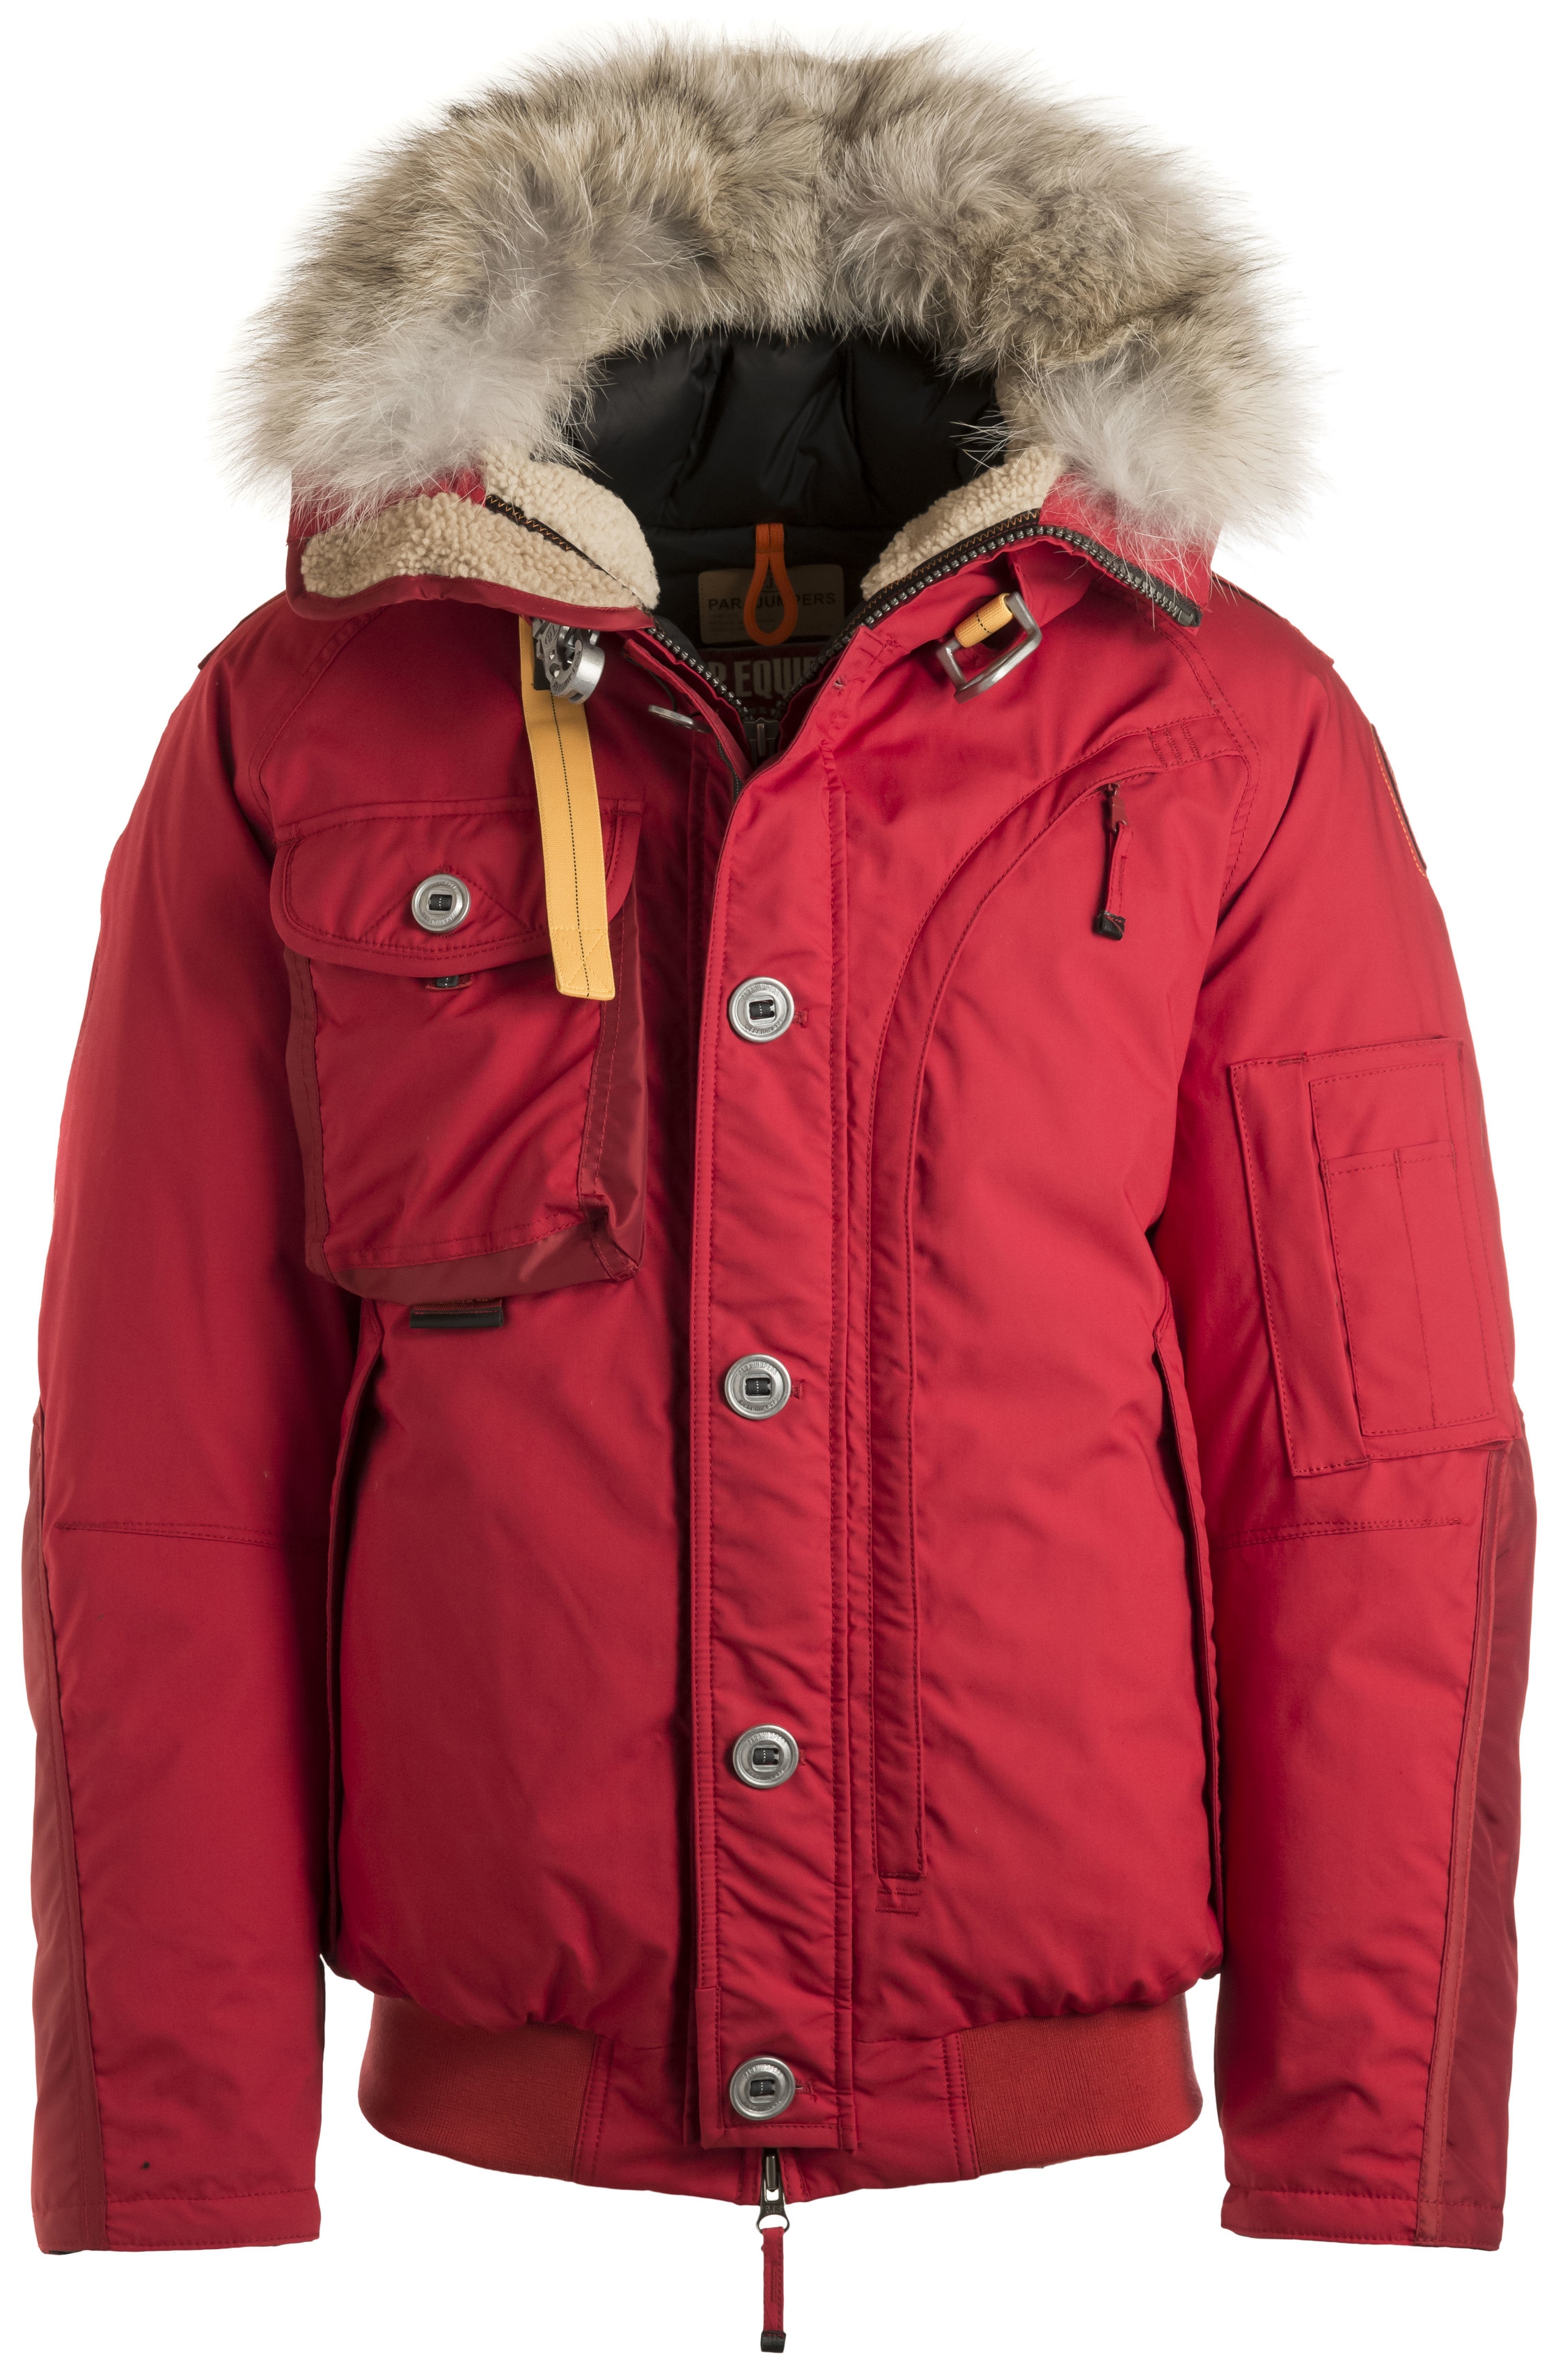 ParaJumpers Red Tribe Coat, $1,495